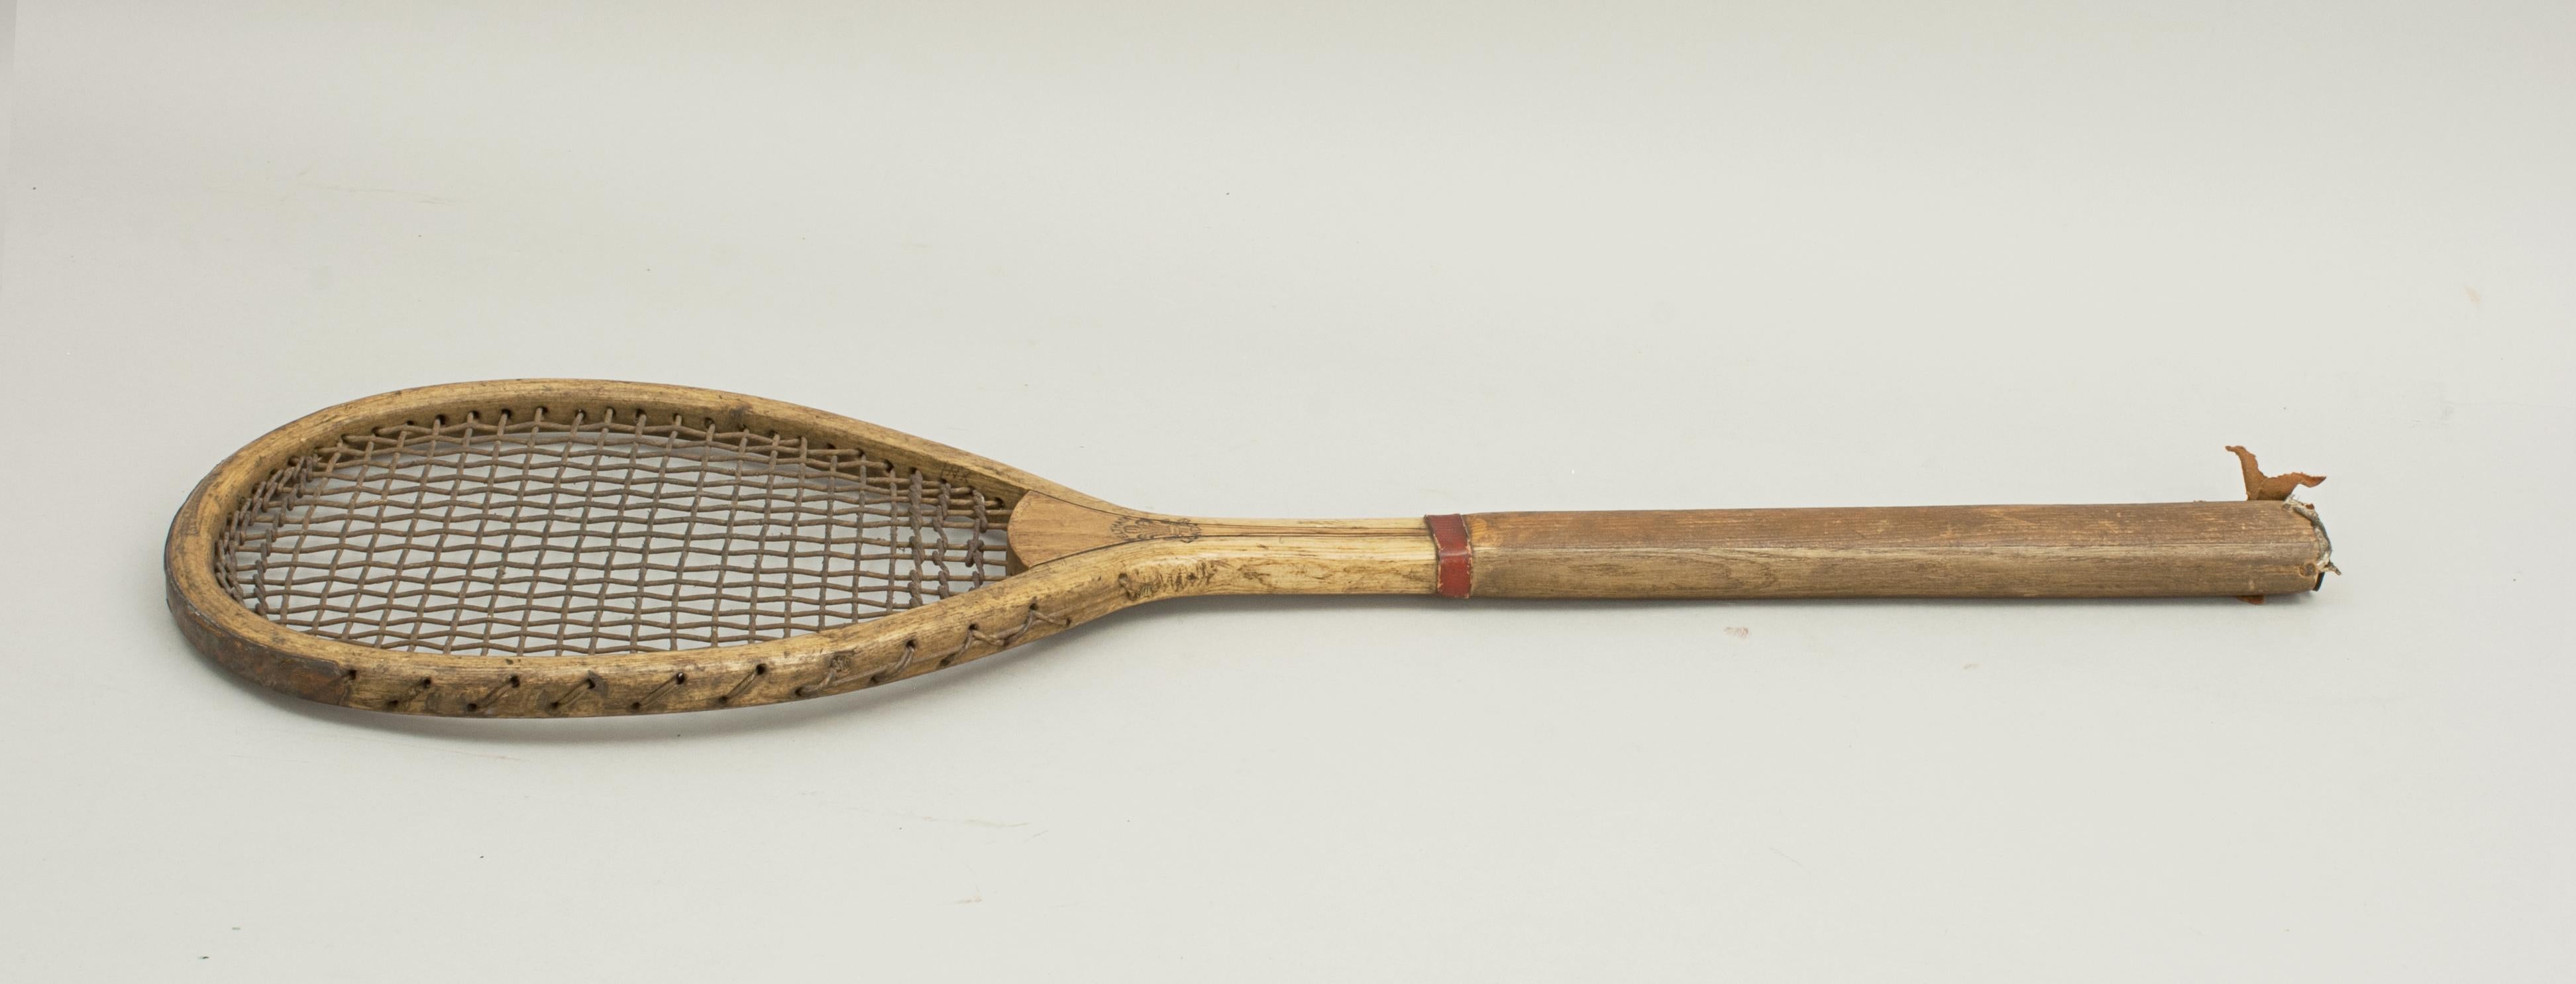 Antique Feltham lawn tennis racket, 'The Alexandra'.
A rare, early lawn tennis racquet in good original condition by Feltham of London. The racket is light in weight as the early rackets were and is probably from a boxed set. The thick ash frame is